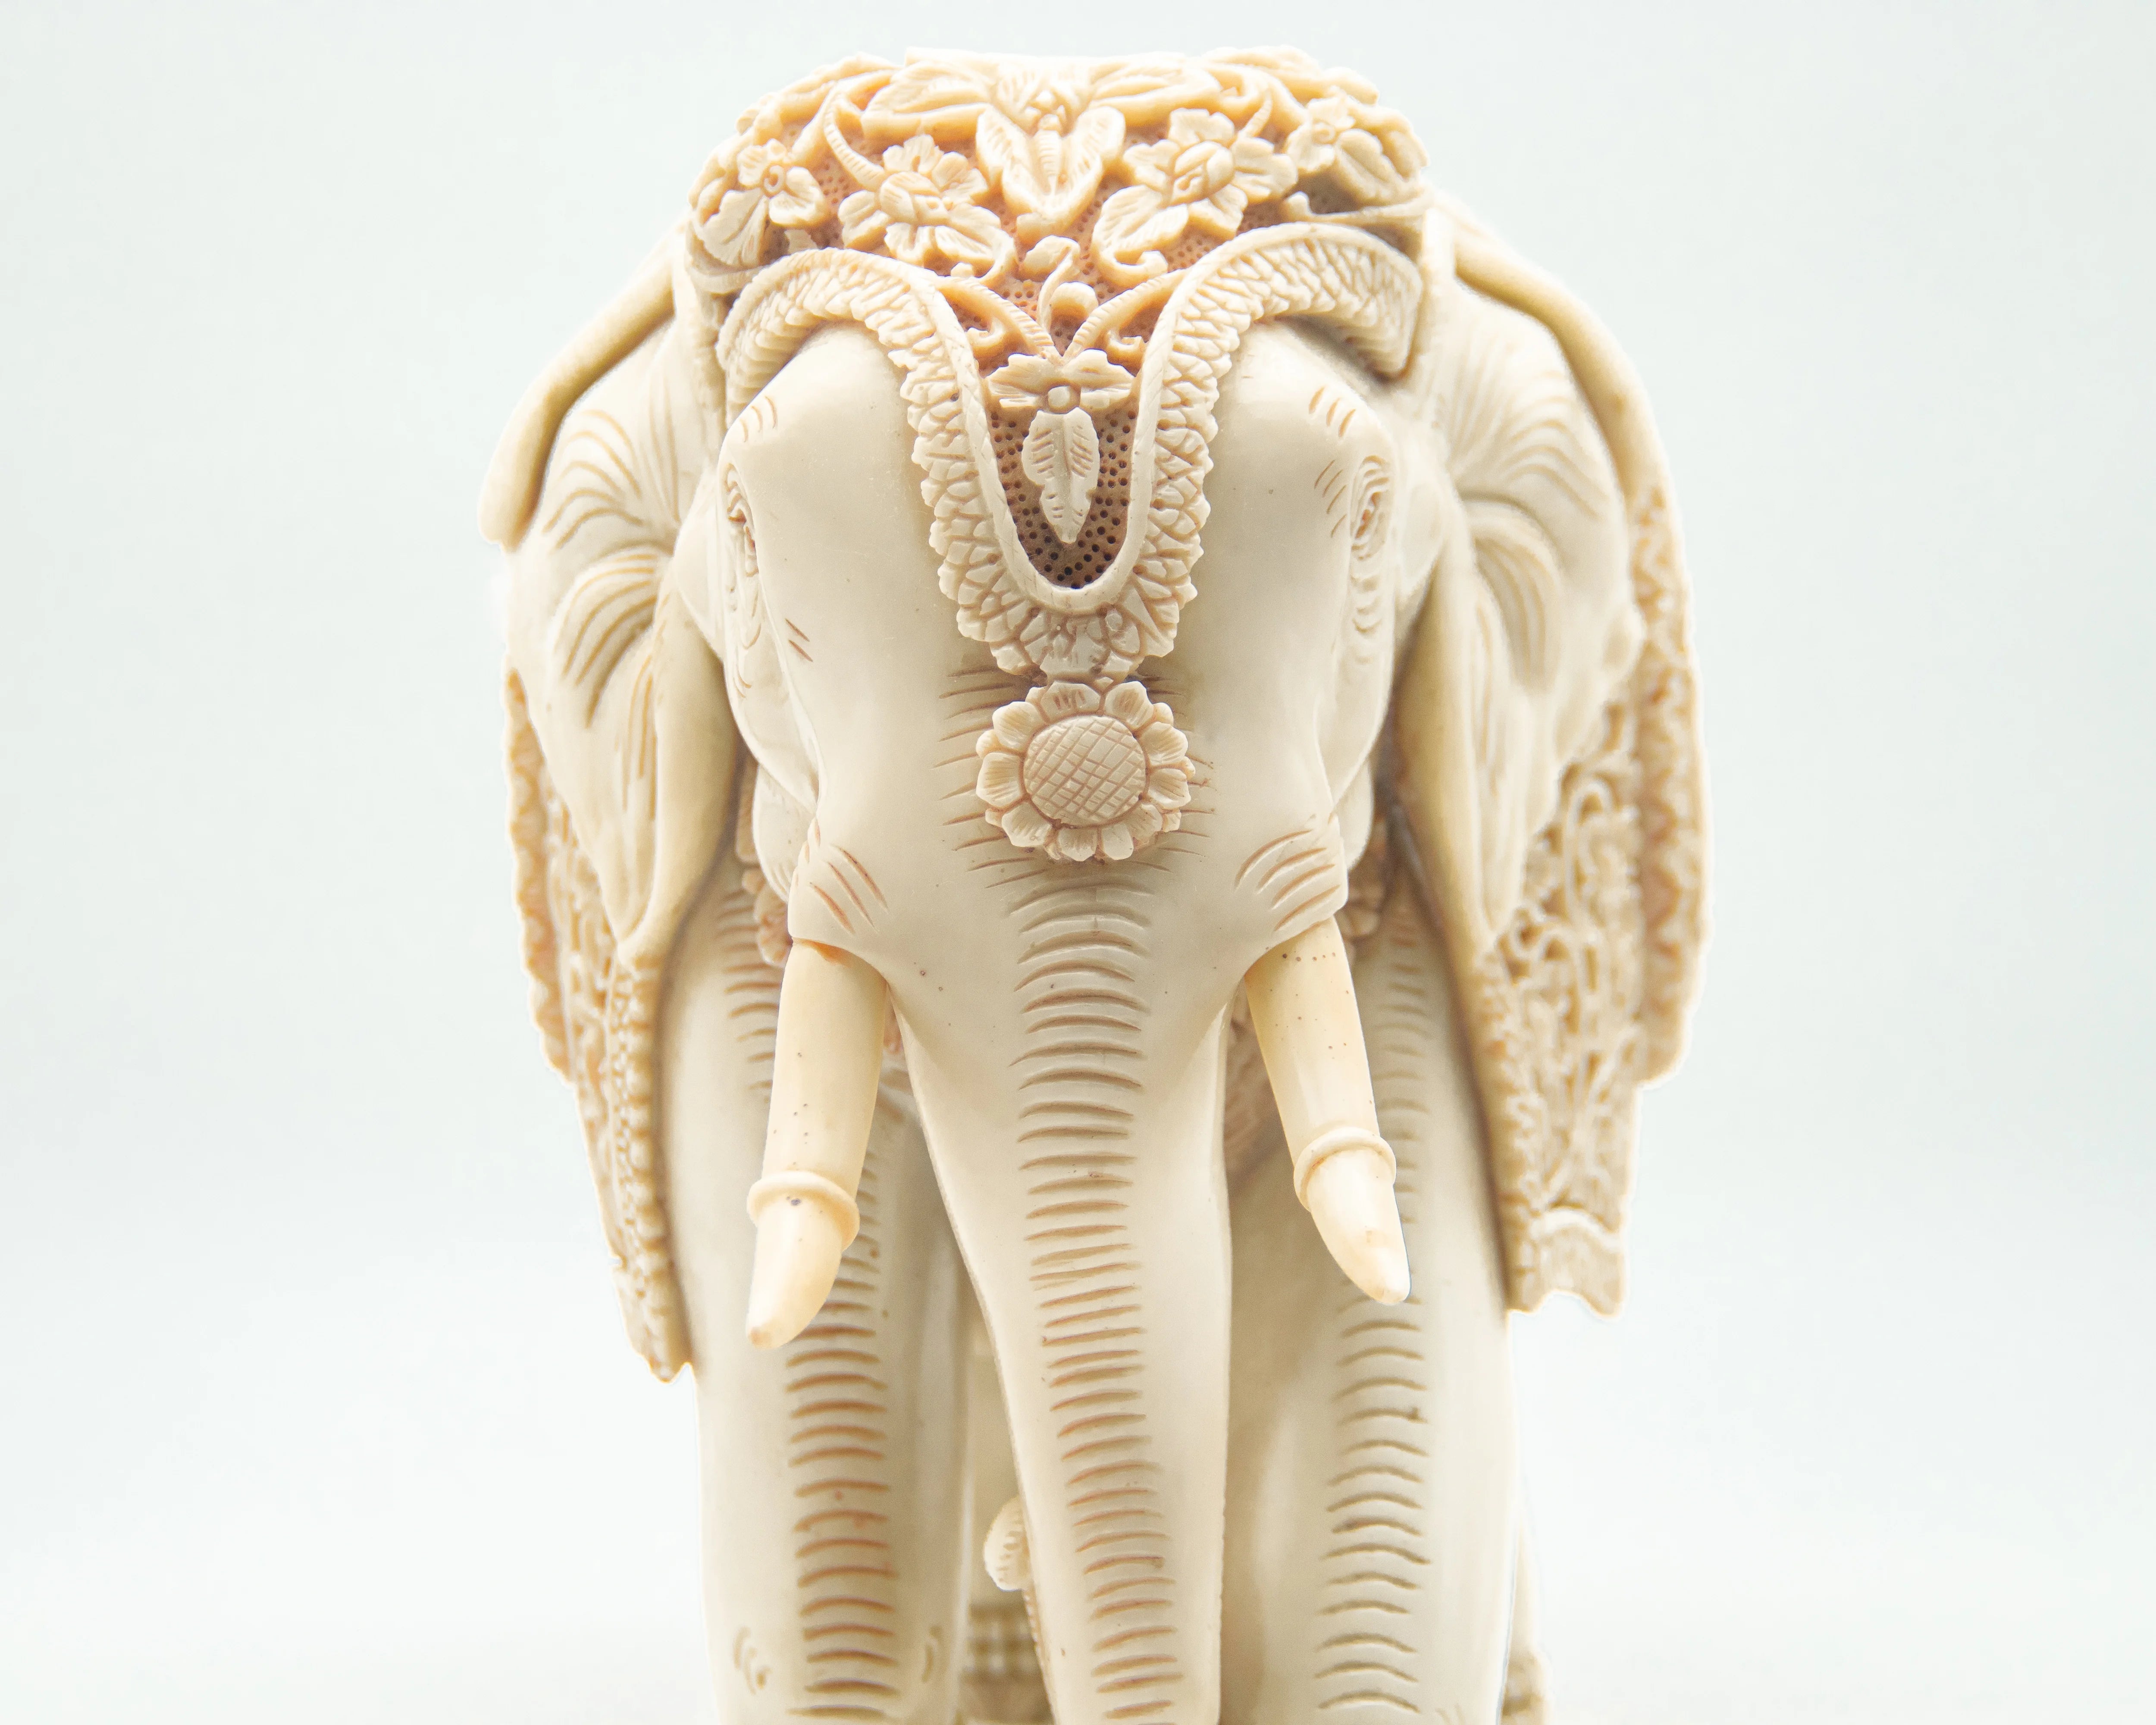 Hand Carved Resin Elephant Statue | Animal Art Figurine for Gift